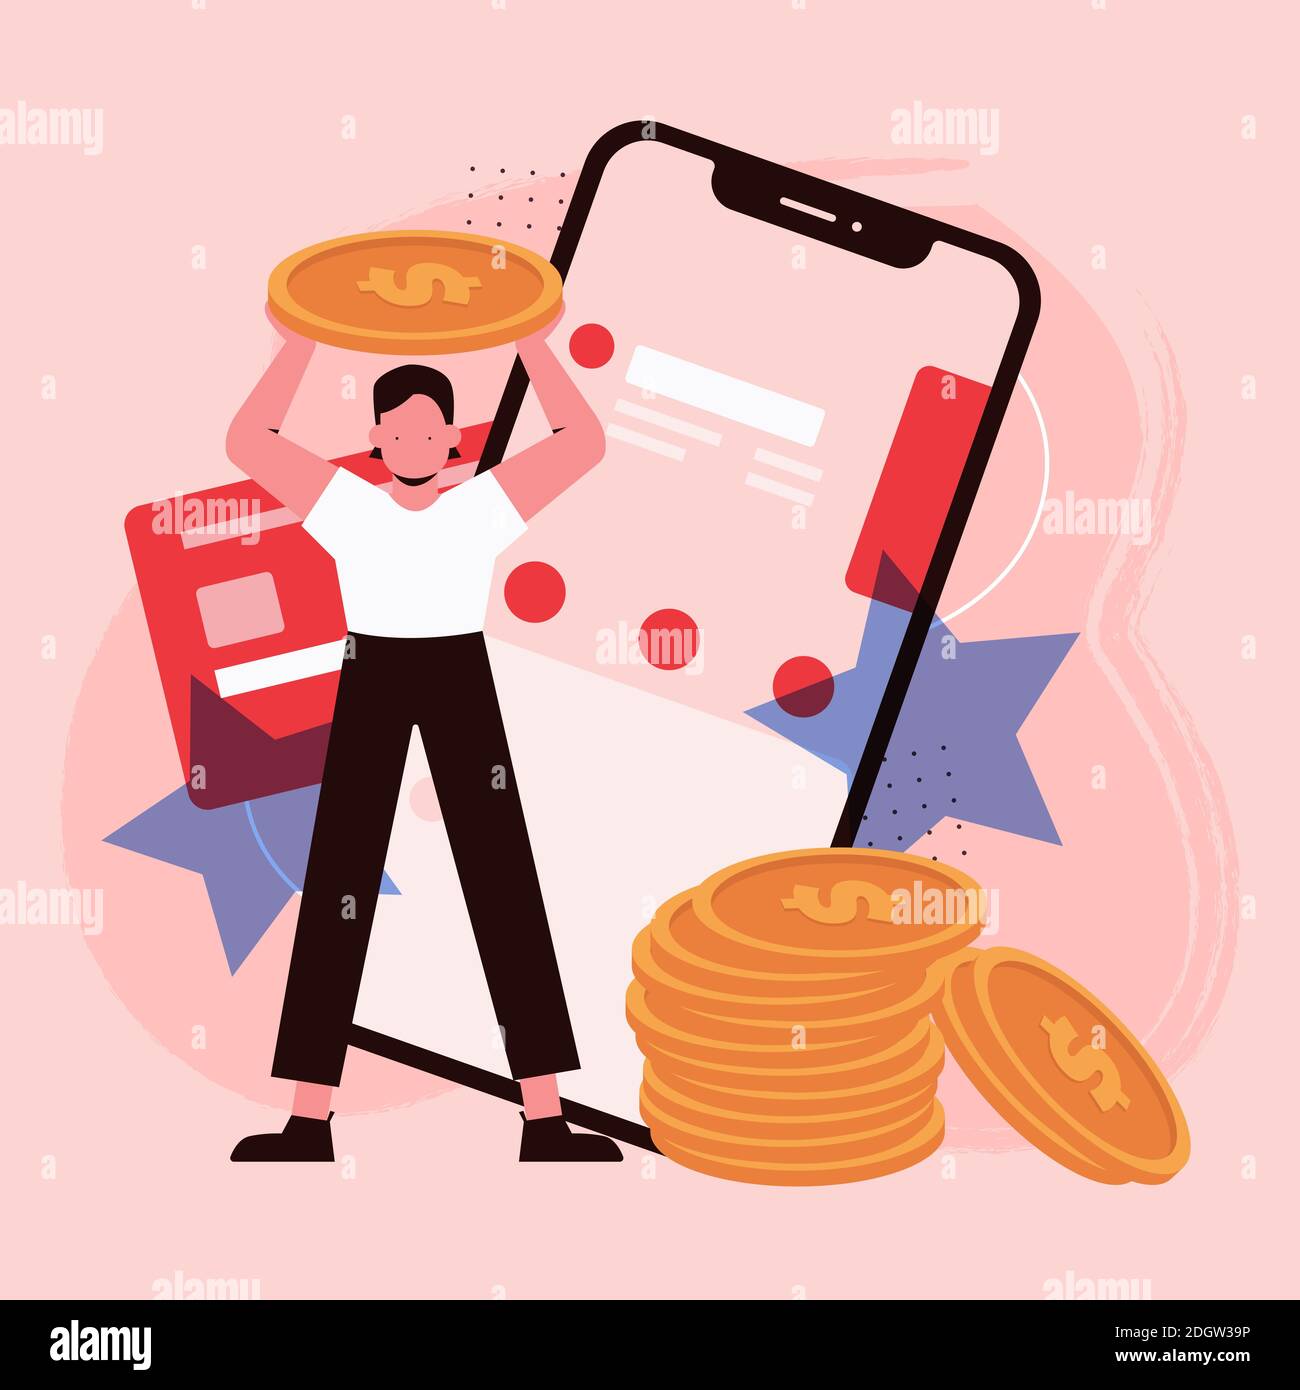 Feedback in mobile application concept vector illustration. Cartoon man customer character holding gold money coin, standing near big mobile phone screen with rating stars and credit card background Stock Vector